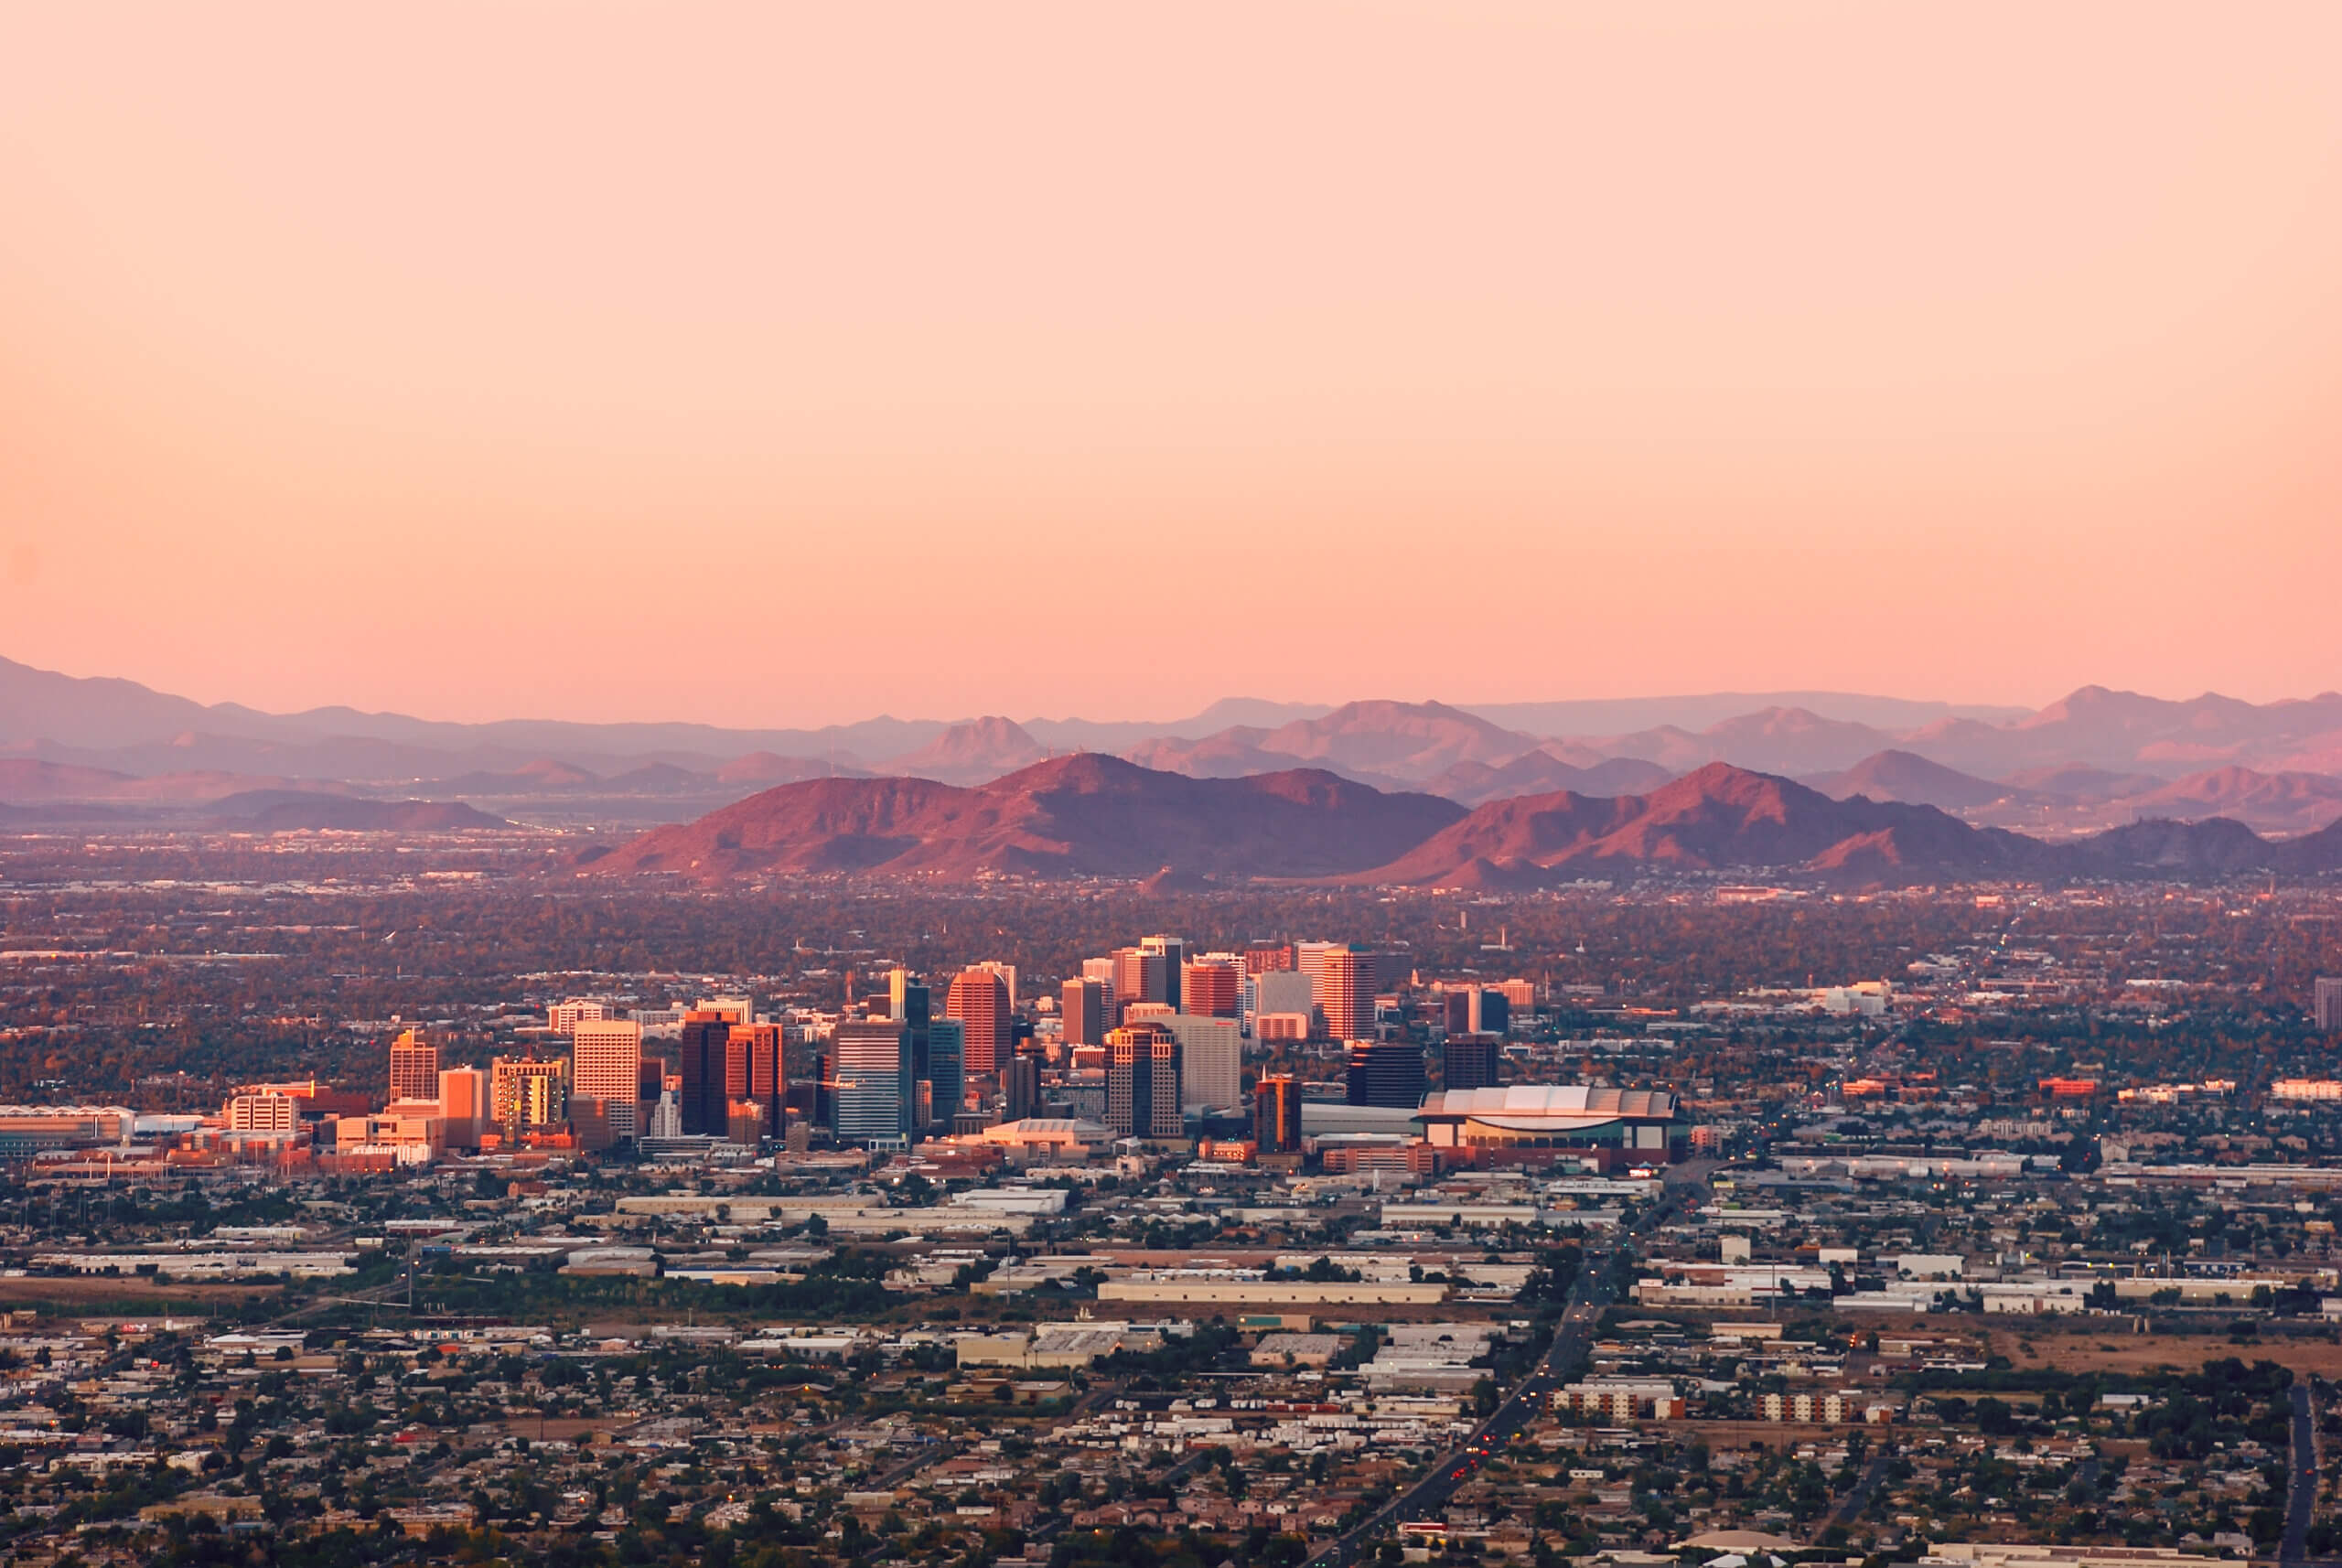 Phoenix Arizona with its downtown lit by the last rays of sun at the dusk.